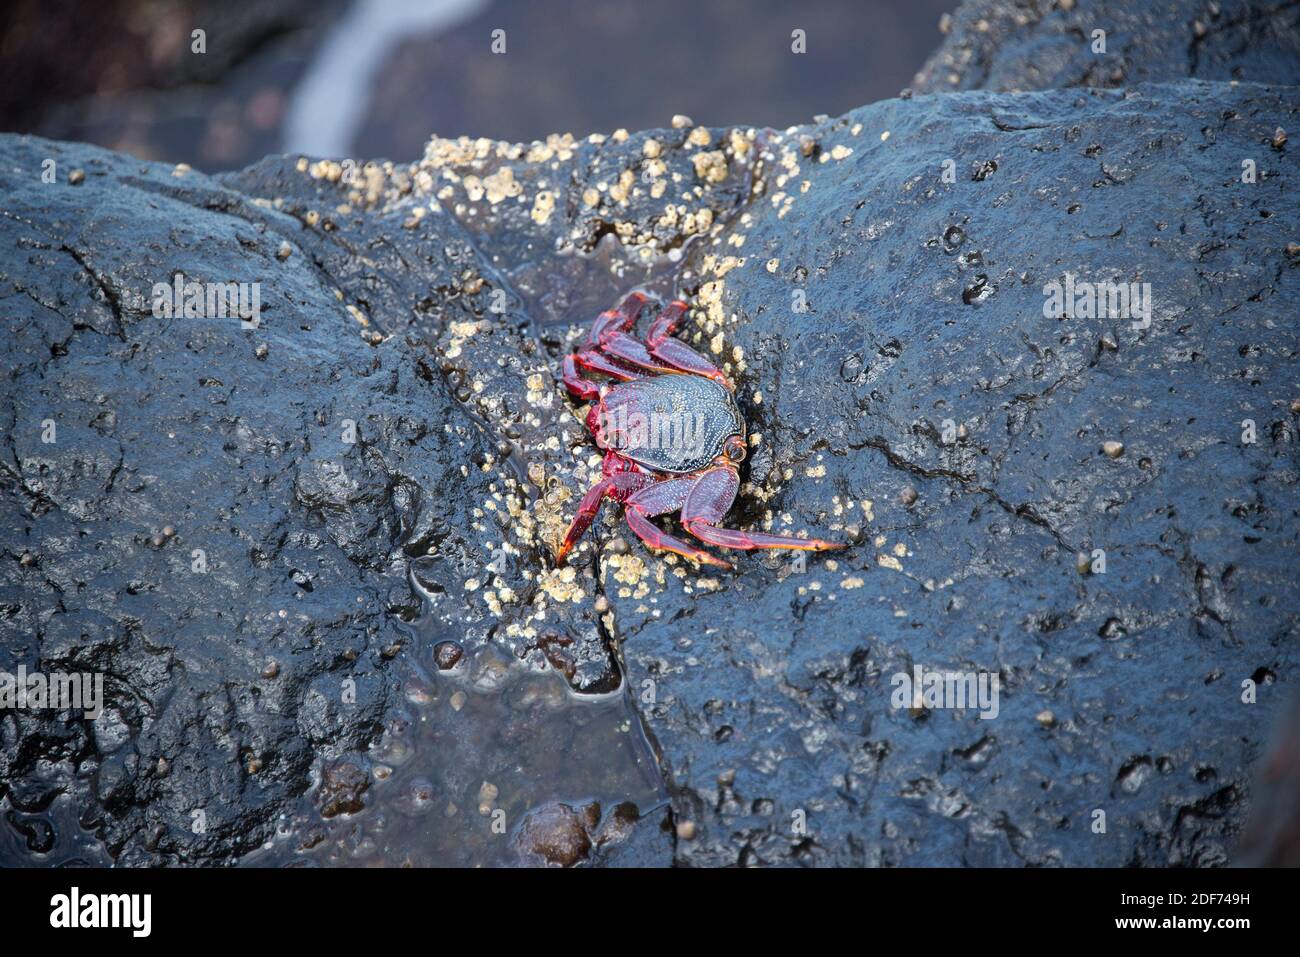 Cangrejo rojo (Grapsus adscensionis) is a crab native to Macaronesia Islands. This photo was taken in La Palma Island, Canary Islands, Spain. Stock Photo